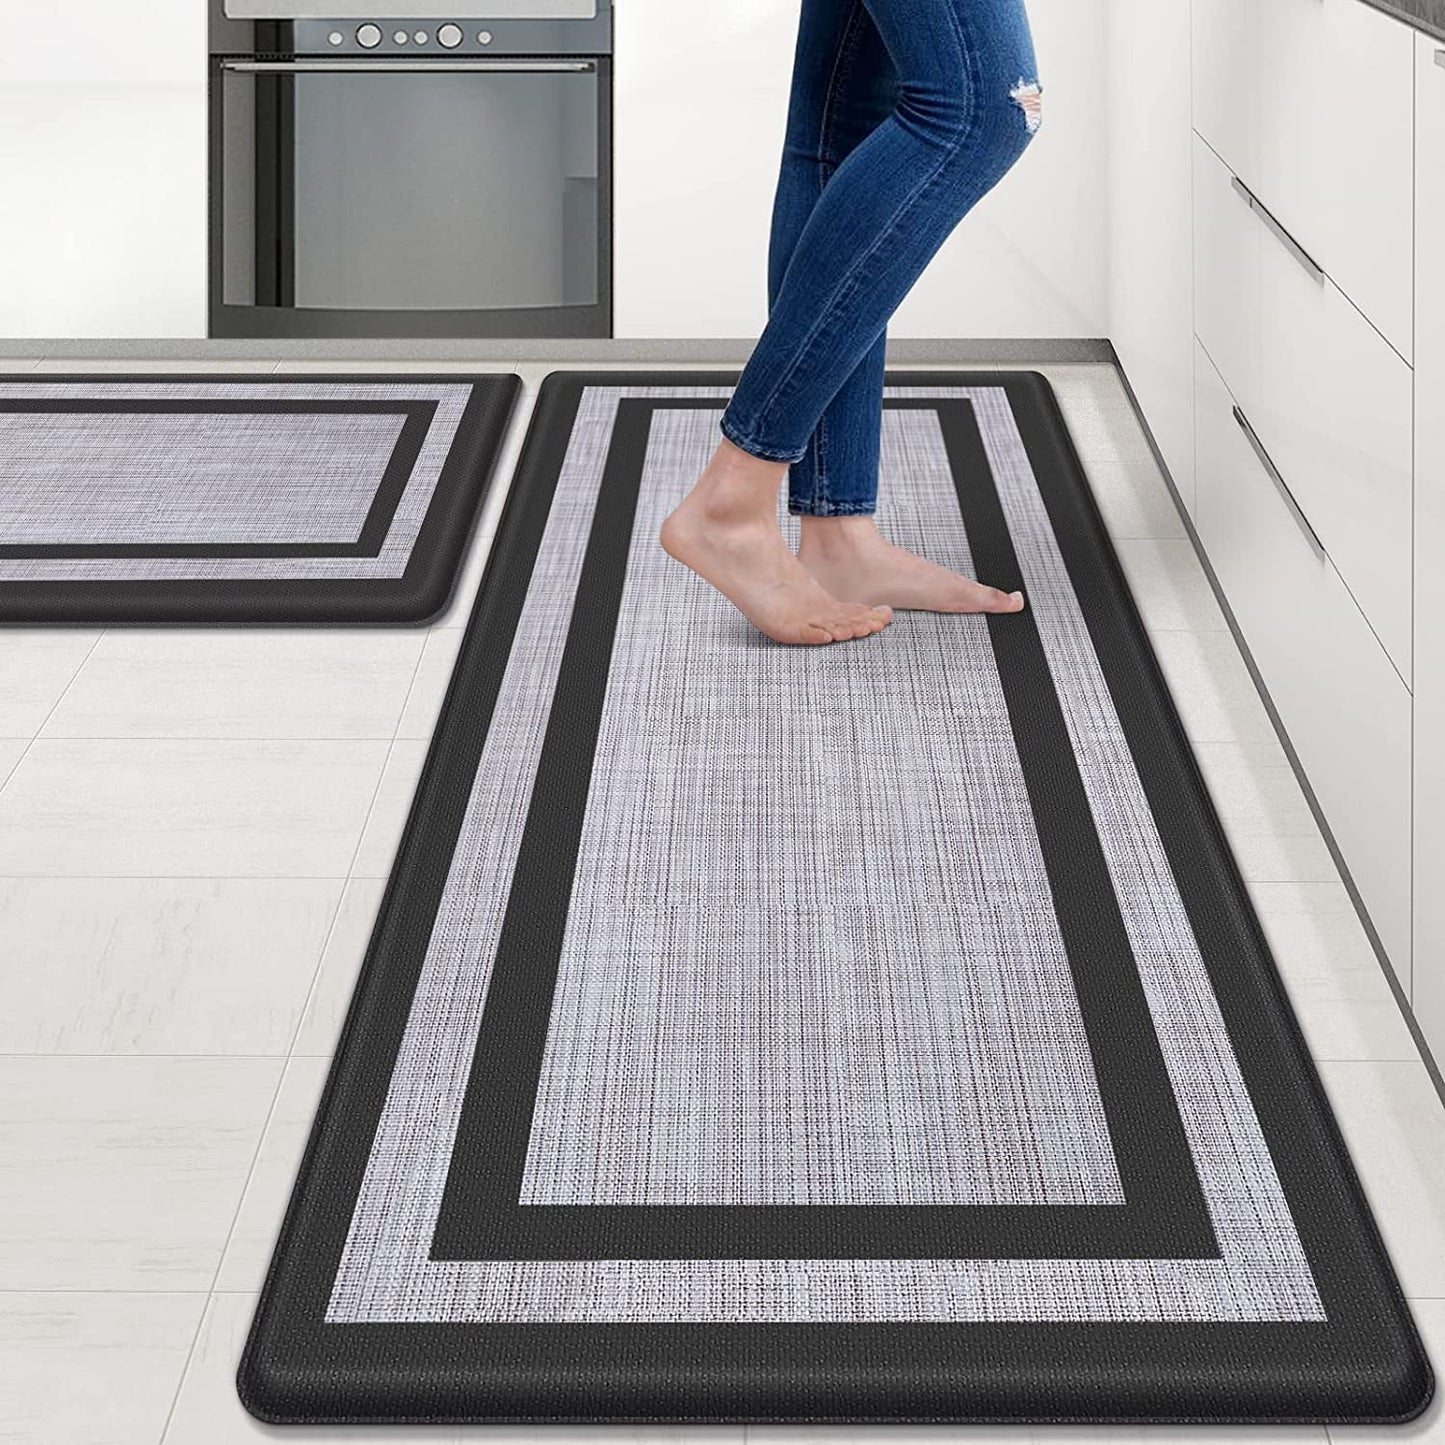 Kitchen Mat [2 PCS] Cushioned Anti-Fatigue Kitchen Rugs Non-Skid Waterproof Kitchen Mats and Rugs Ergonomic Comfort Standing Mat for Kitchen, Floor, Office, Sink, Laundry, Gray and Gray